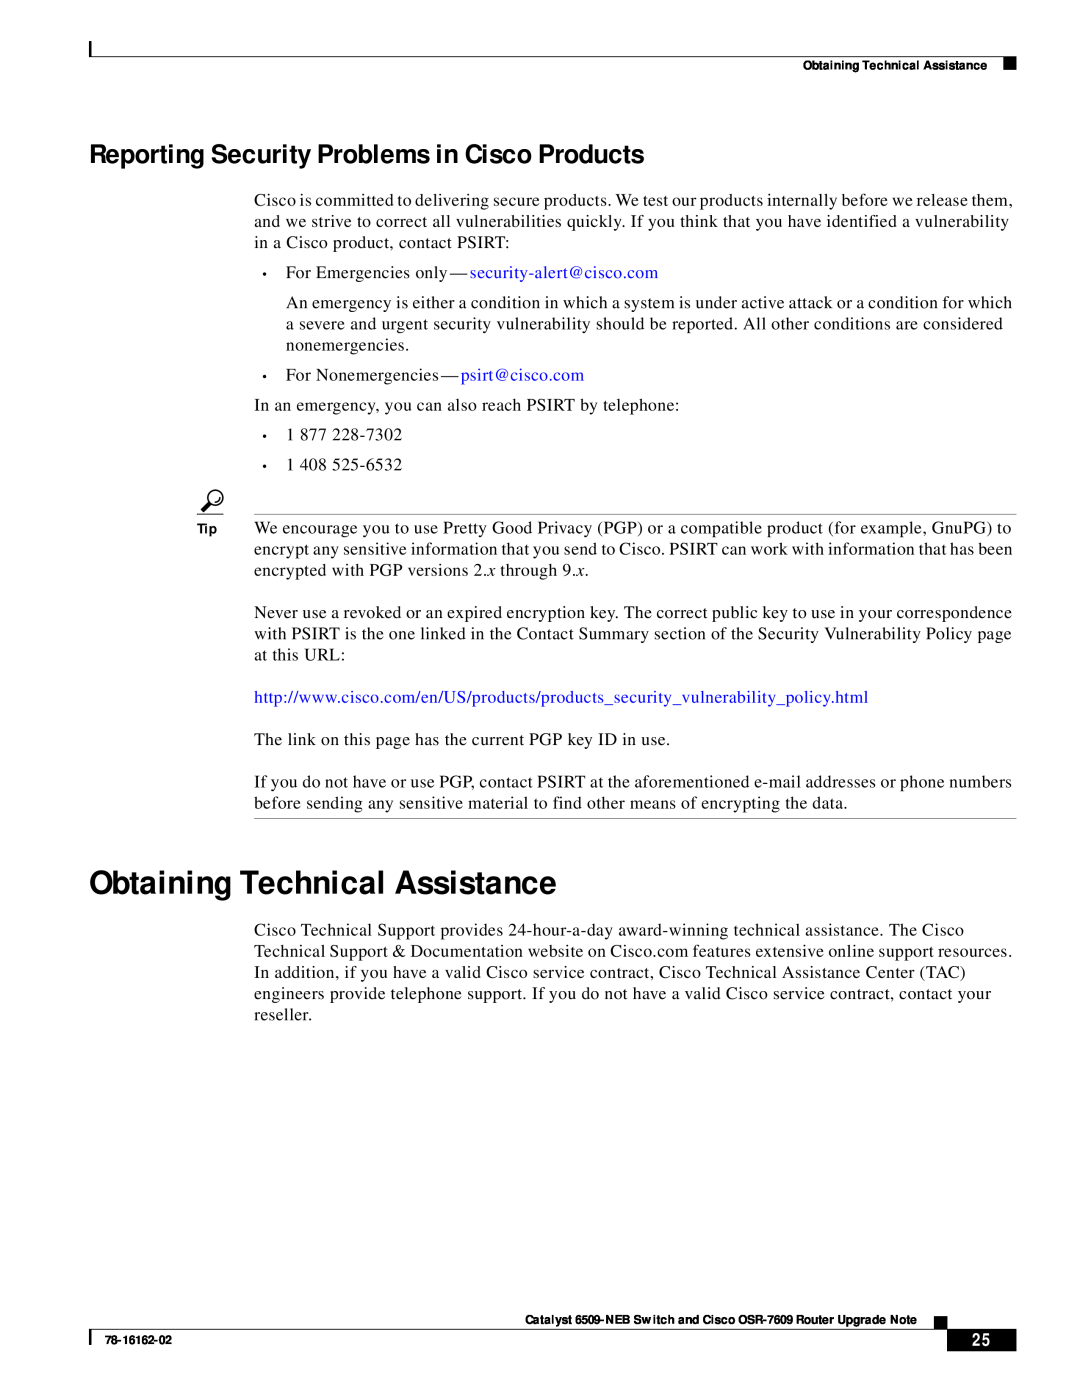 Cisco Systems OSR-7609, 6509-NEB manual Obtaining Technical Assistance, Reporting Security Problems in Cisco Products 